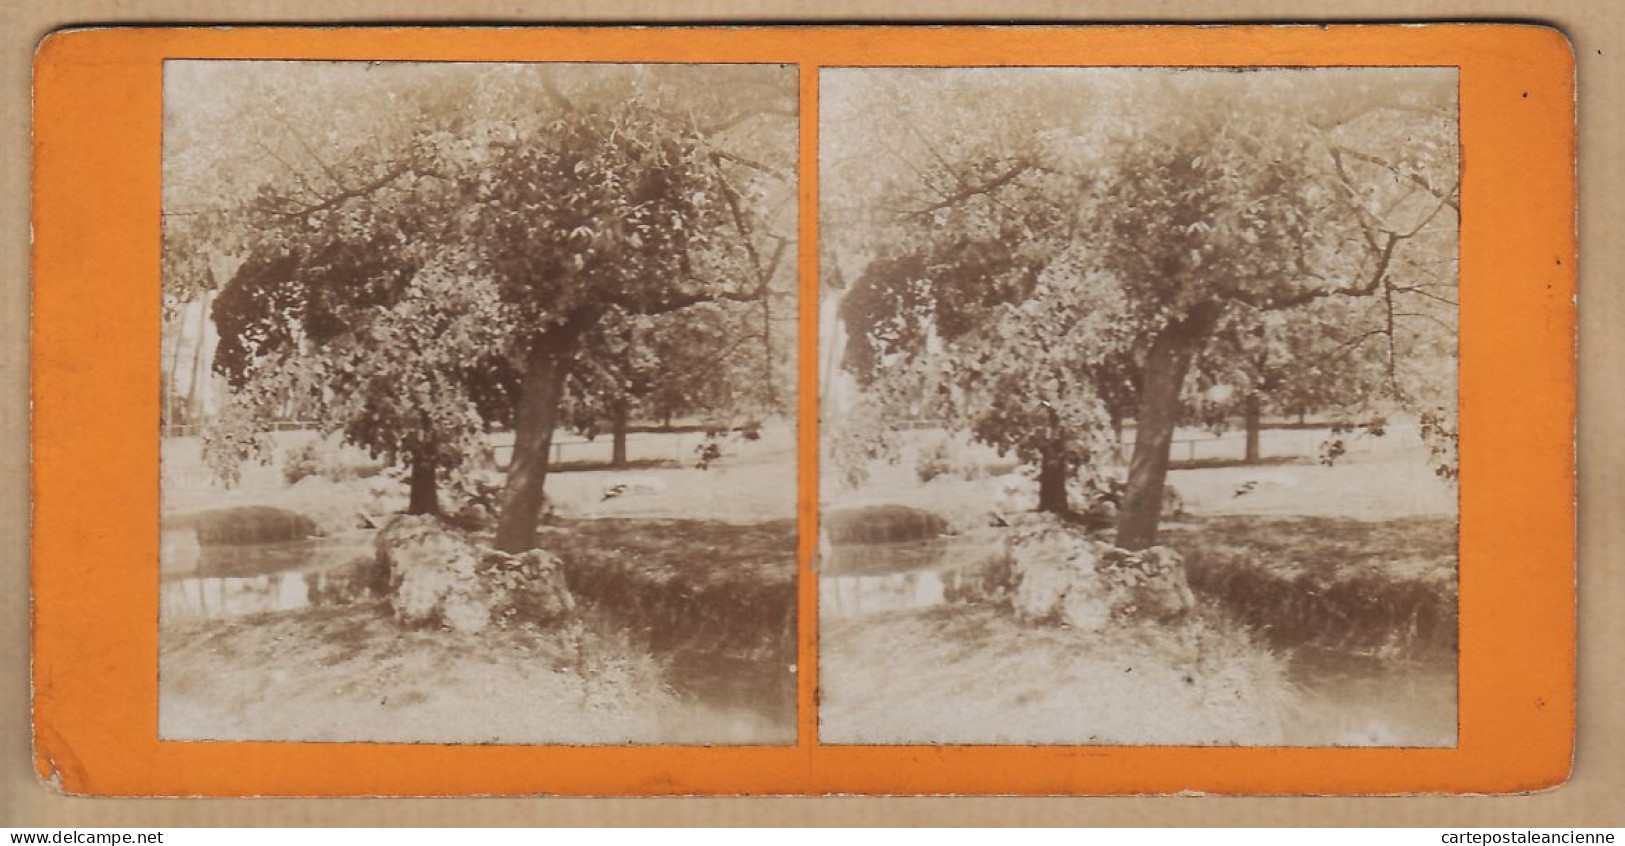 04568 / Stereo View 1890s Arbre OLIVIERS Olivier Olive Tree Photographie Botanique Flore  - Stereo-Photographie